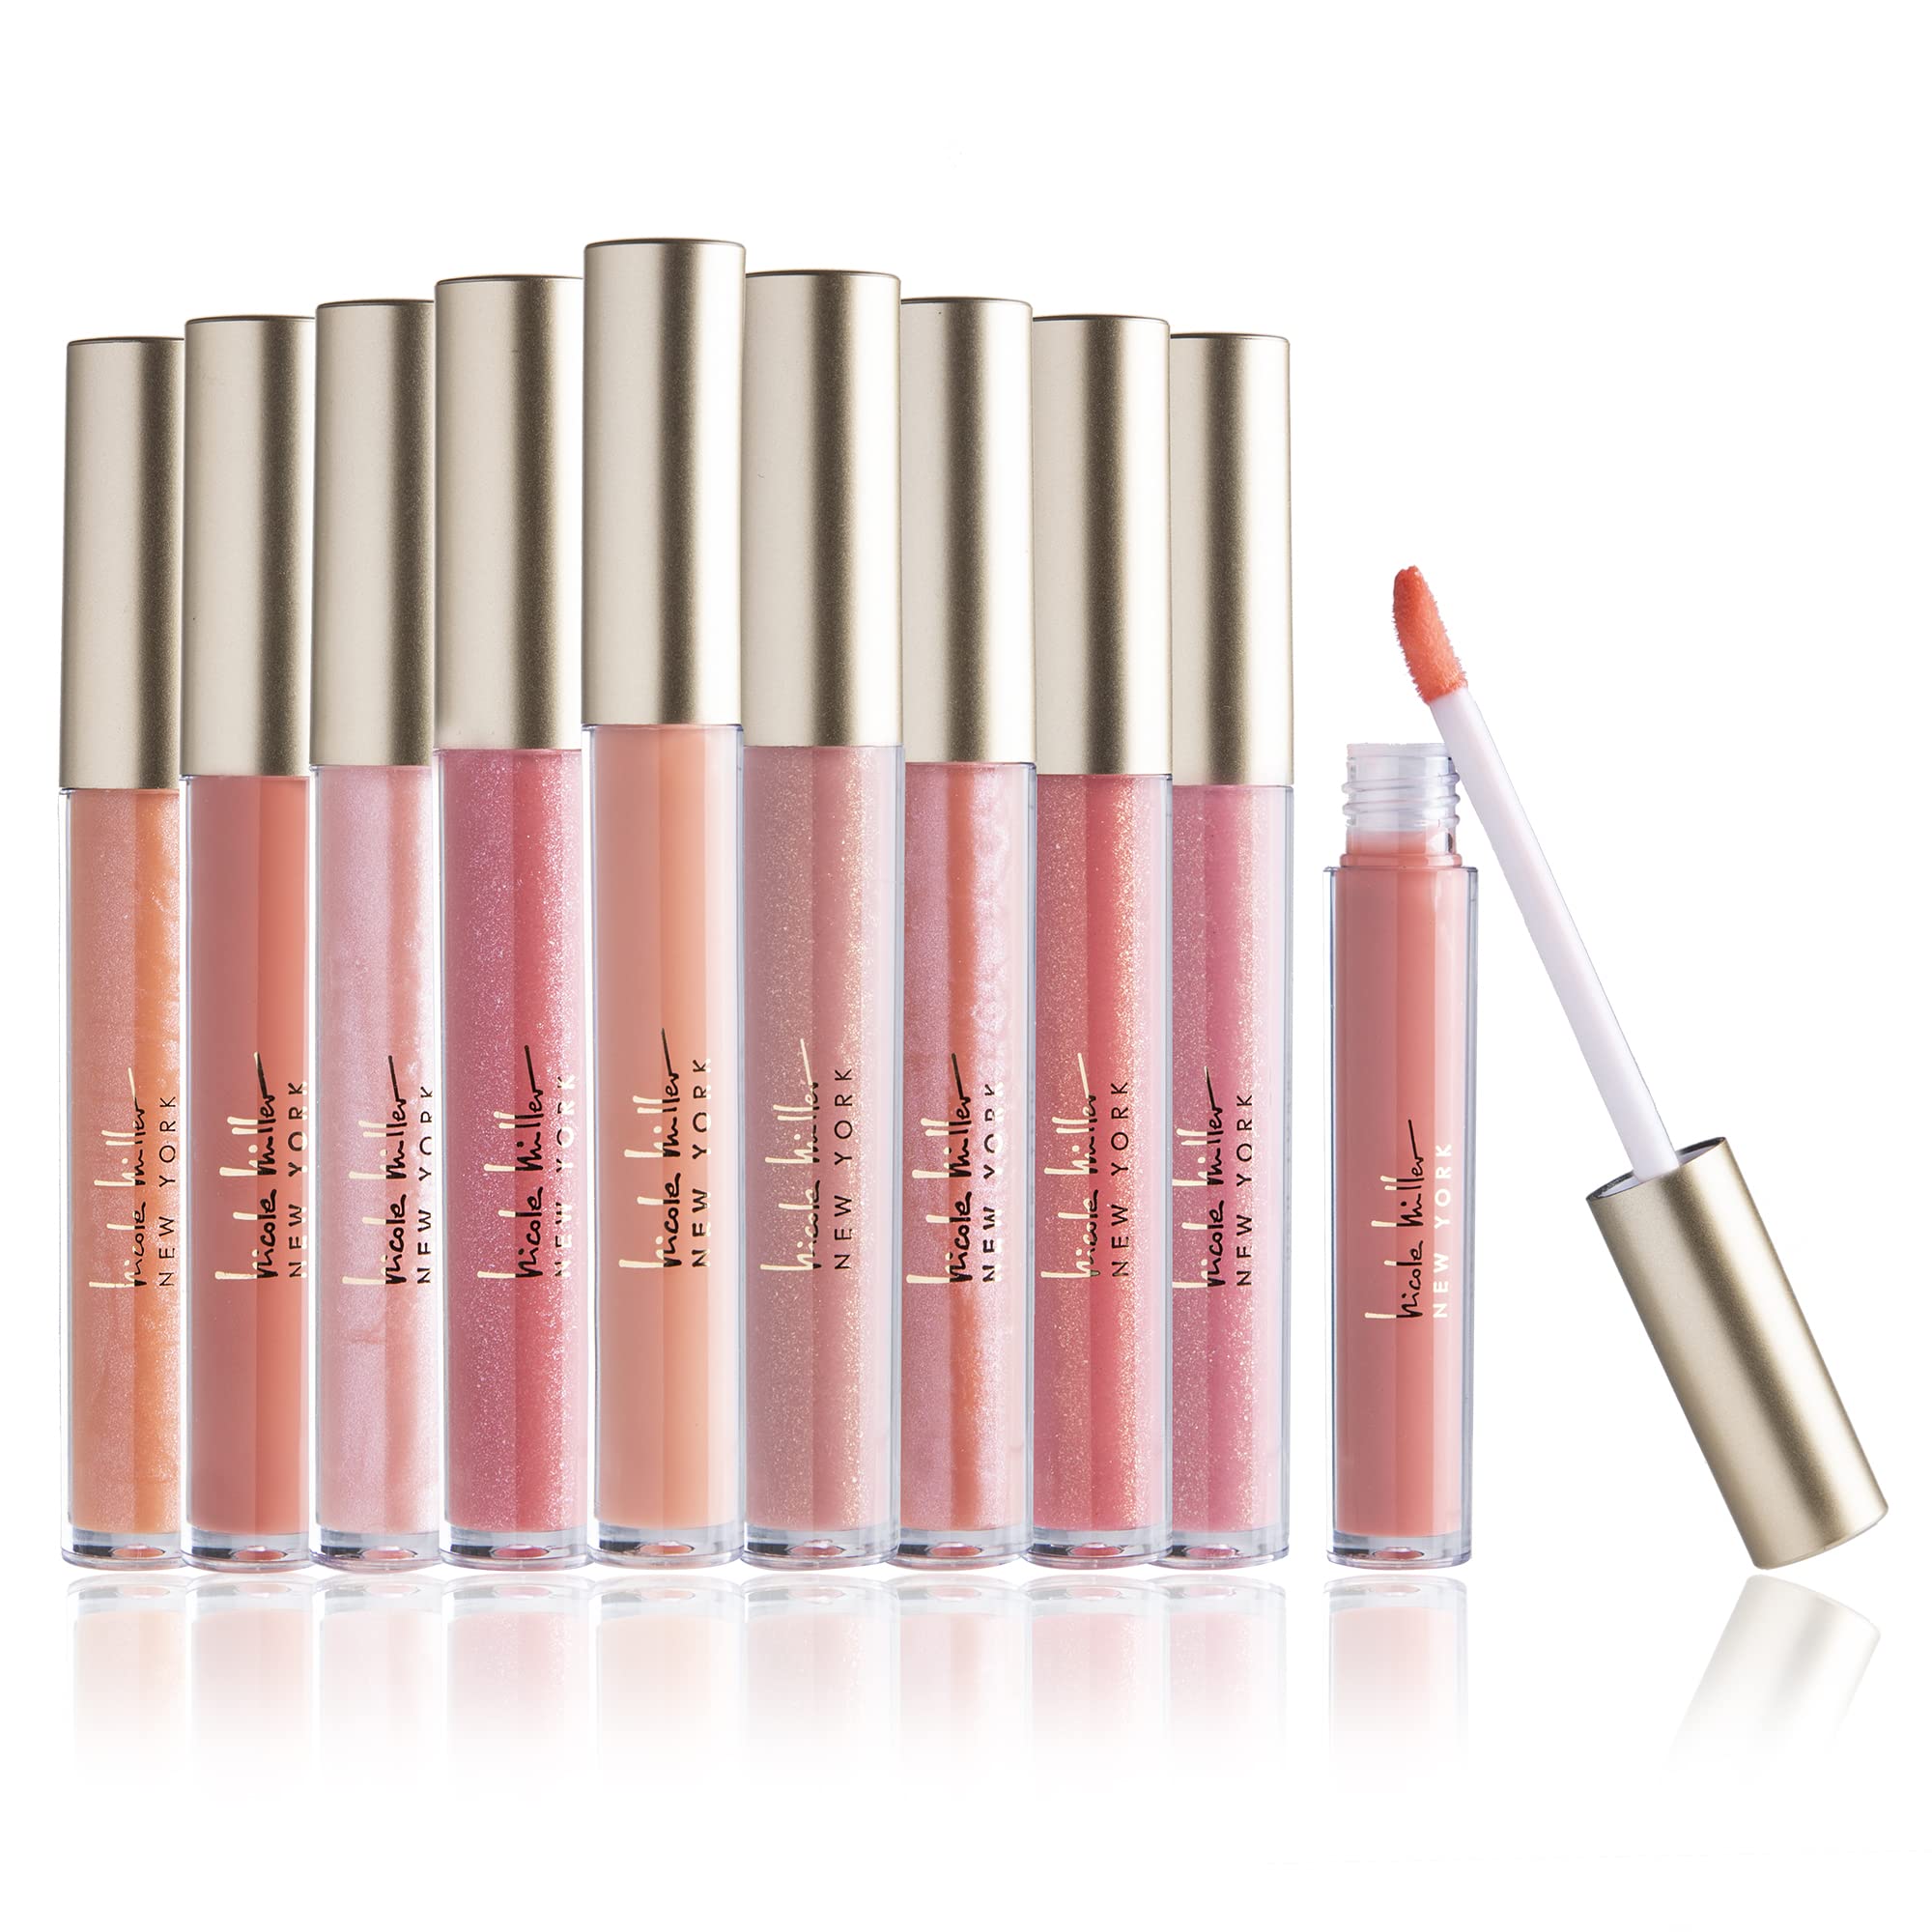 Nicole Miller 5 Pc Lip Gloss Collection Pink (5 Pieces)